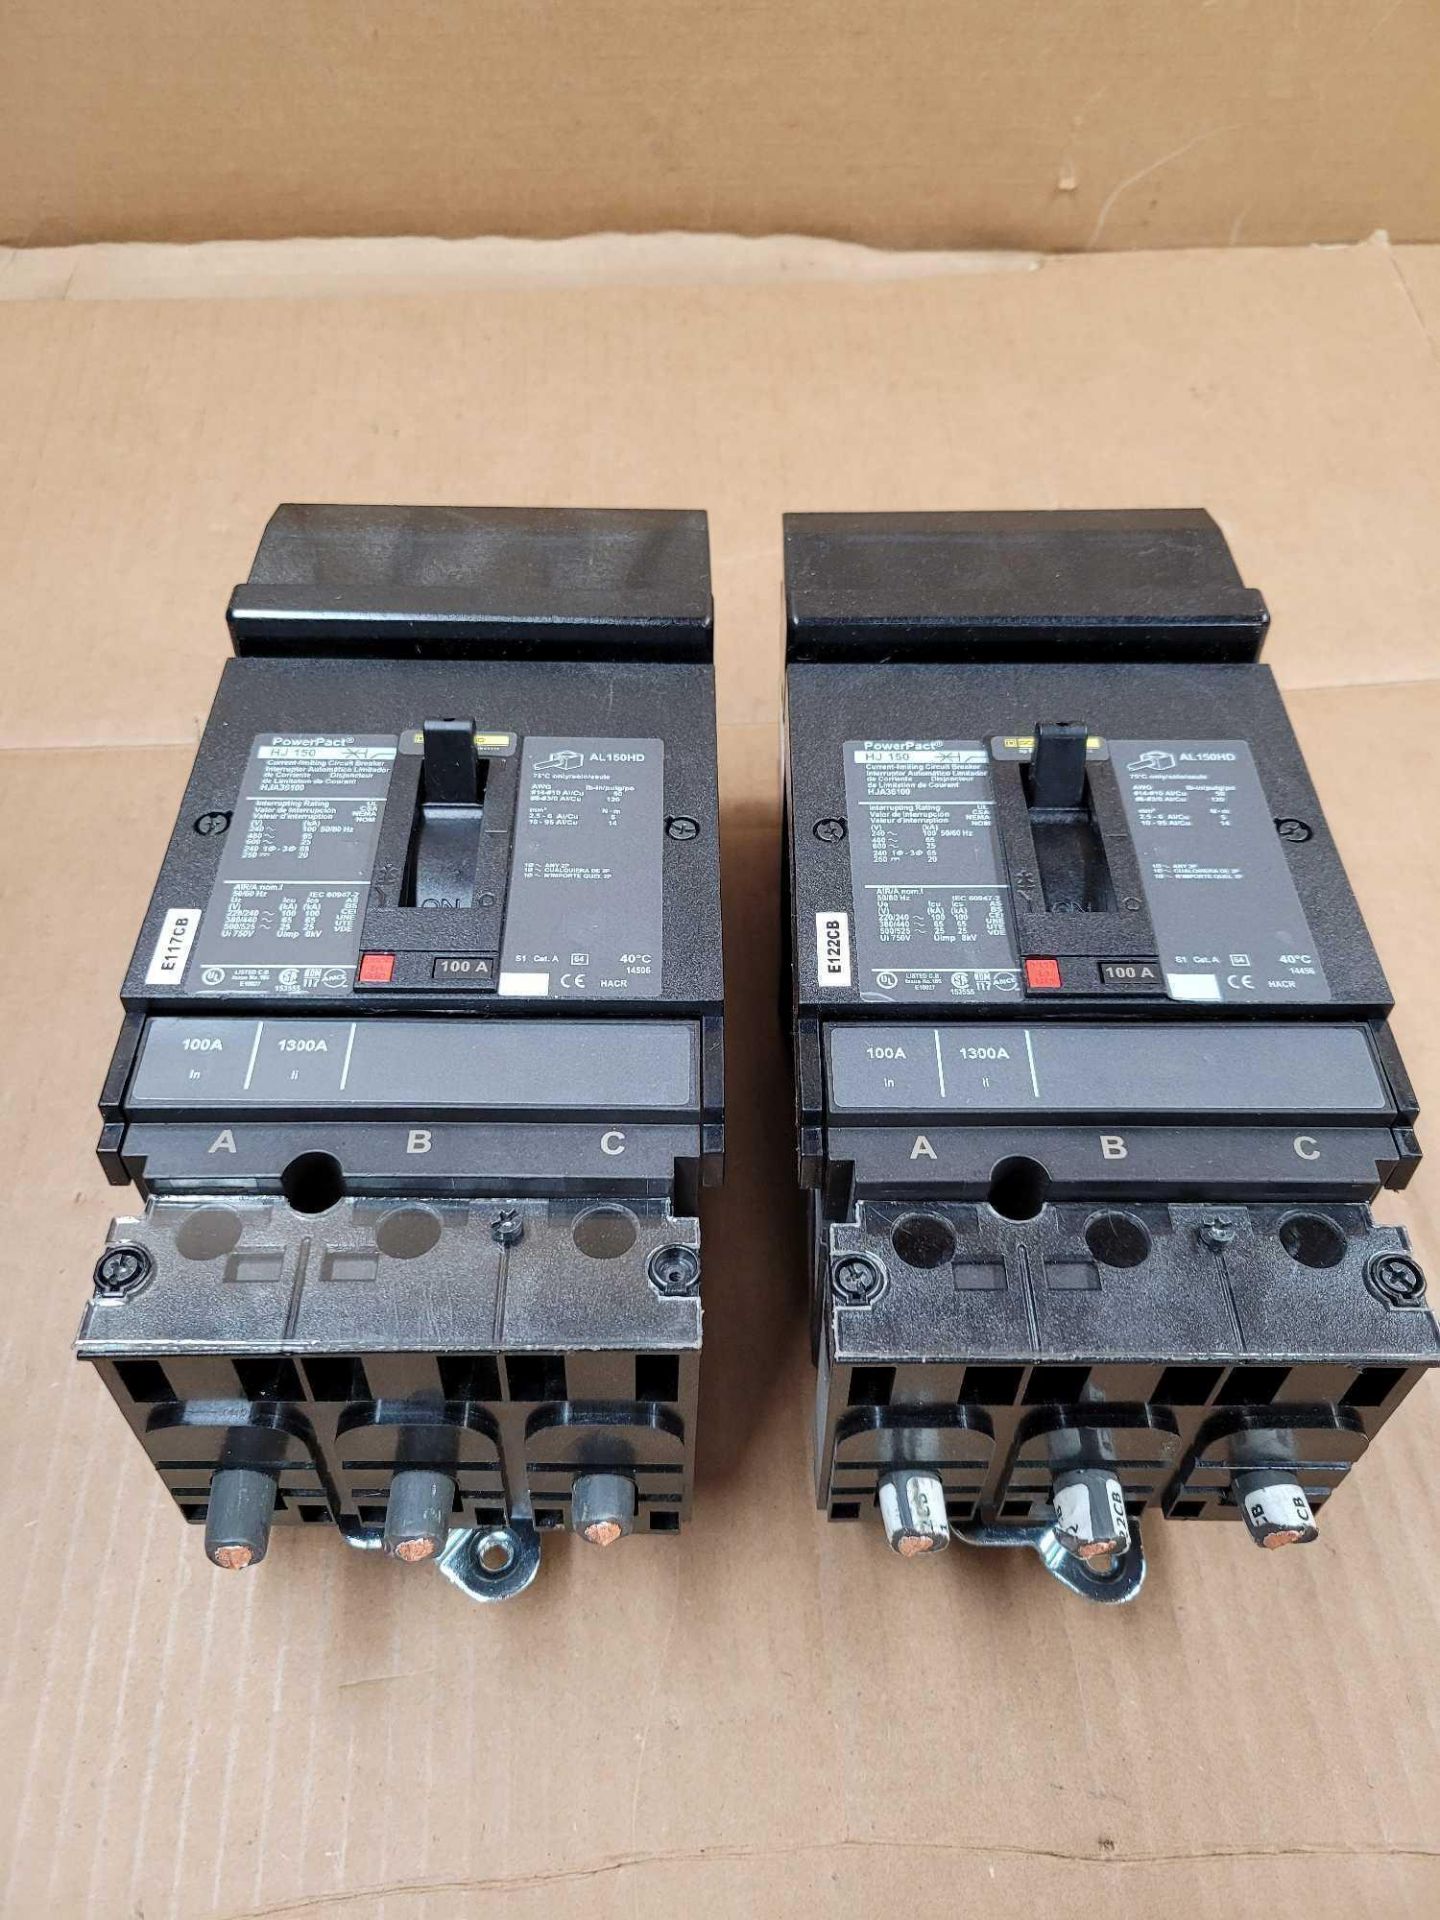 LOT OF 2 SQUARE D HJA36100 / 100 Amp Molded Case Circuit Breaker  /  Lot Weight: 9.4 lbs